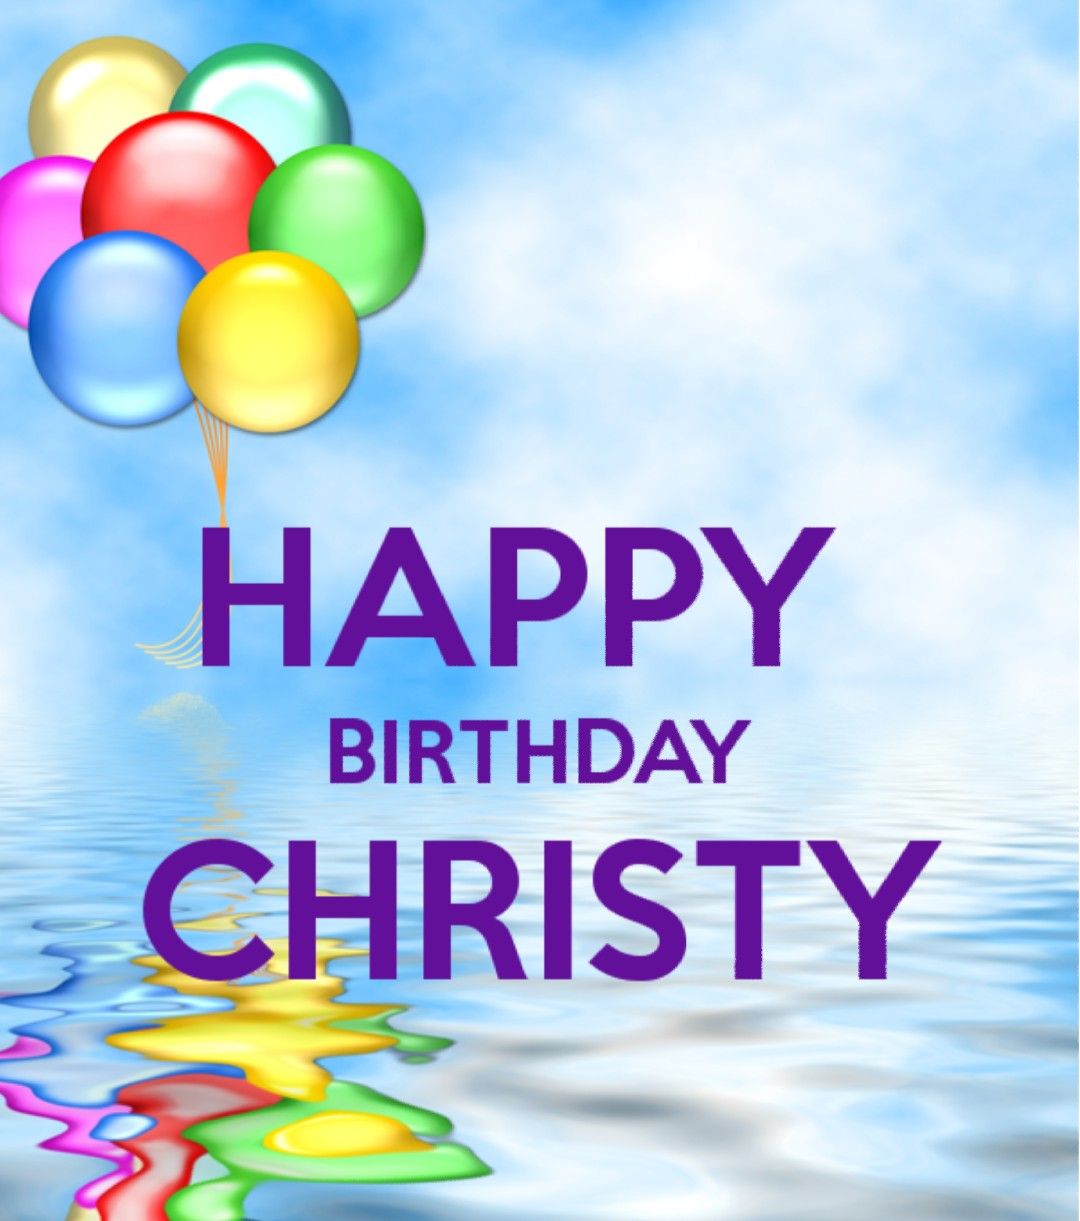 clare murtagh recommends happy birthday christy gif pic